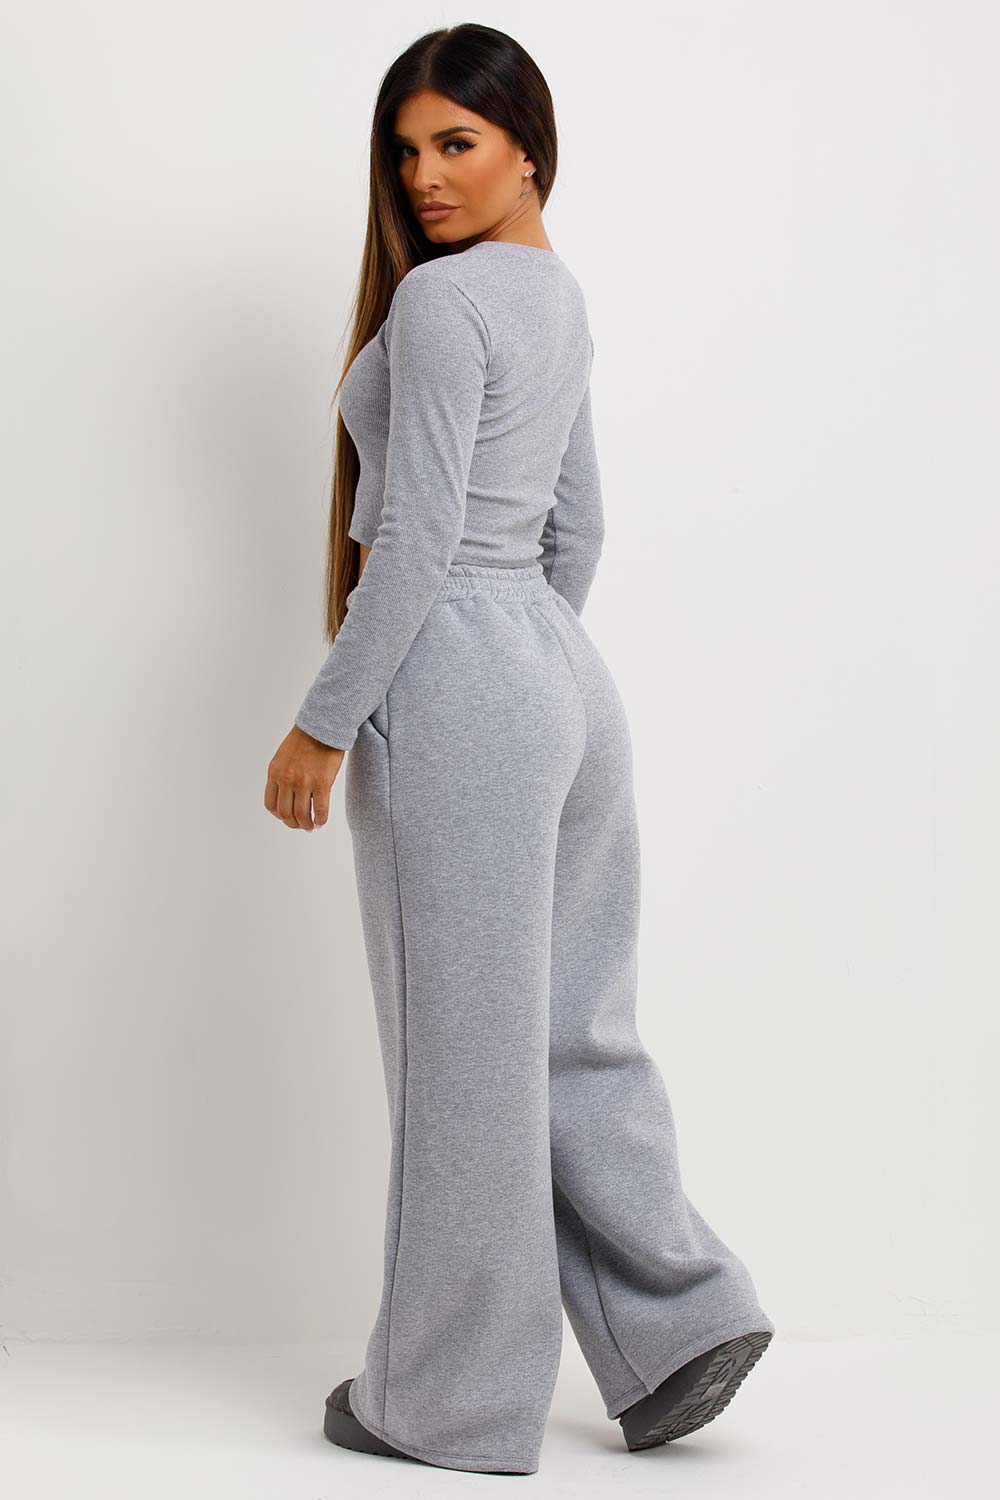 womens wide leg joggers and top loungewear co ord set